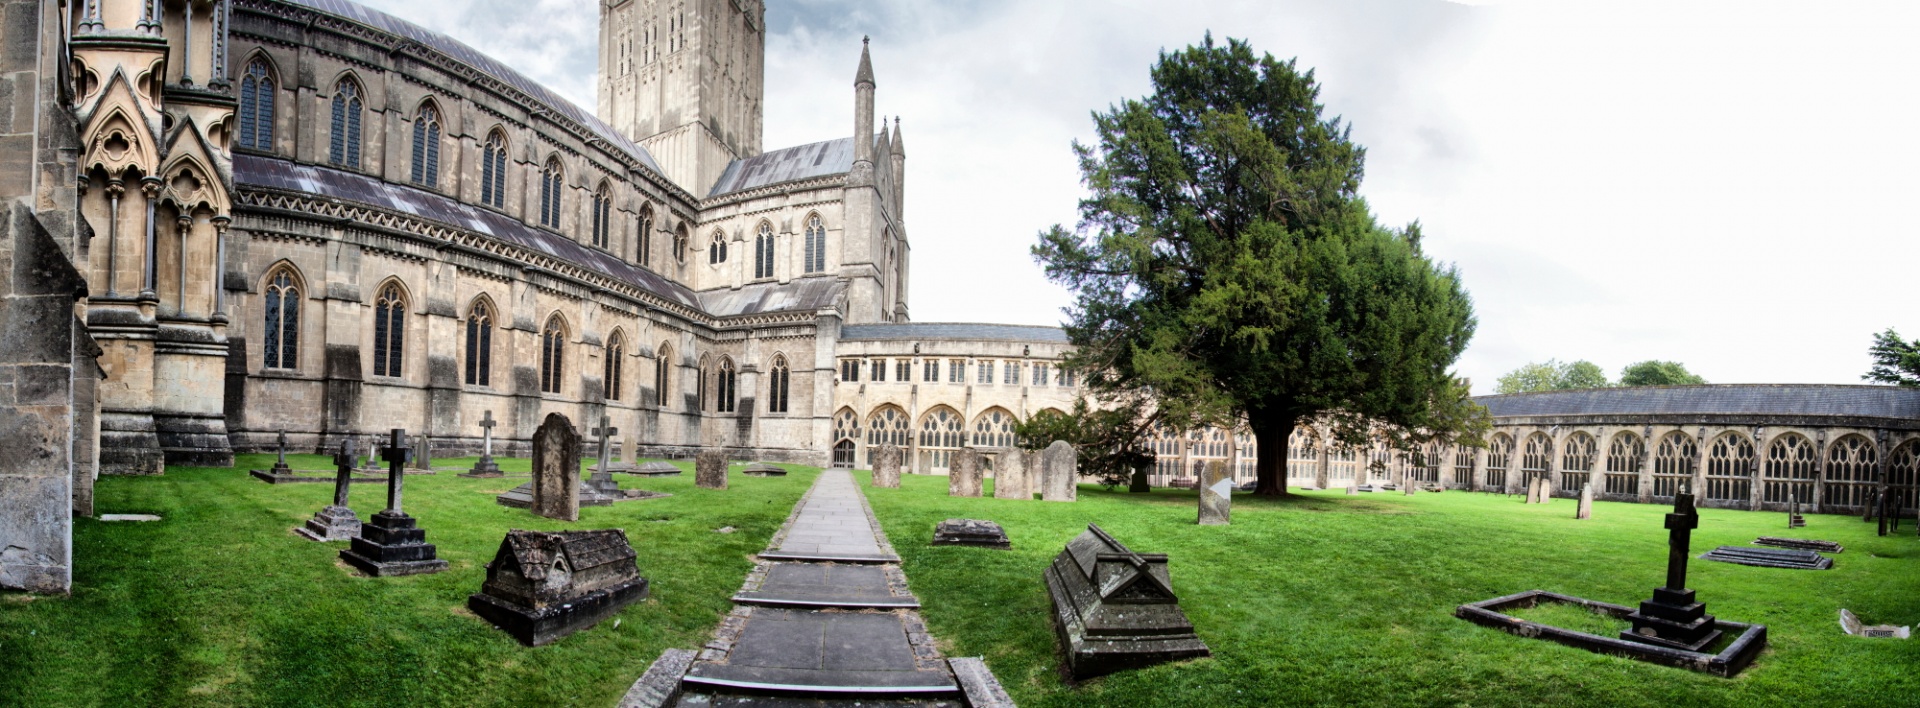 wells cathedral cloister free photo